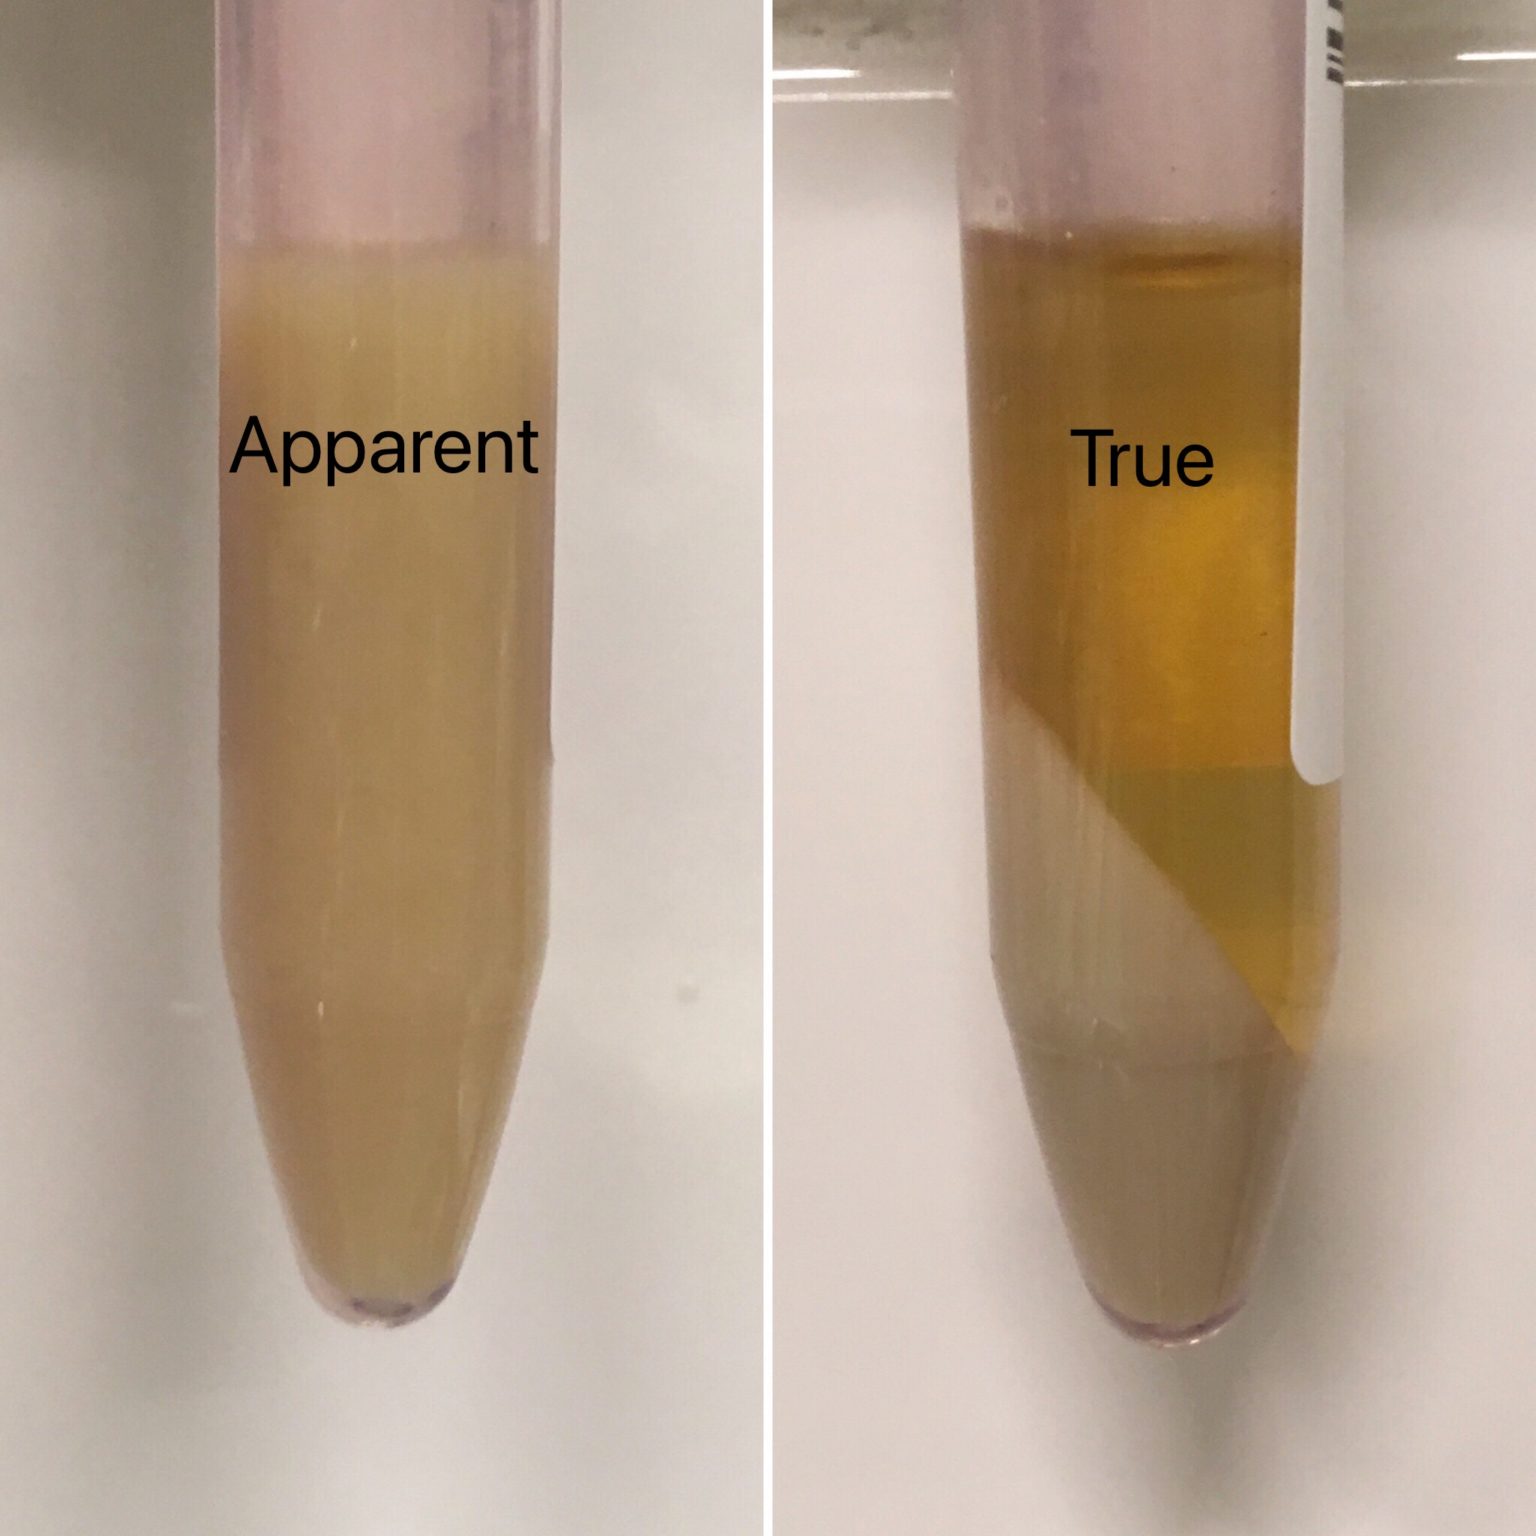 Urine Sediment Of The Month Urines True Colors Renal Fellow Network 2853